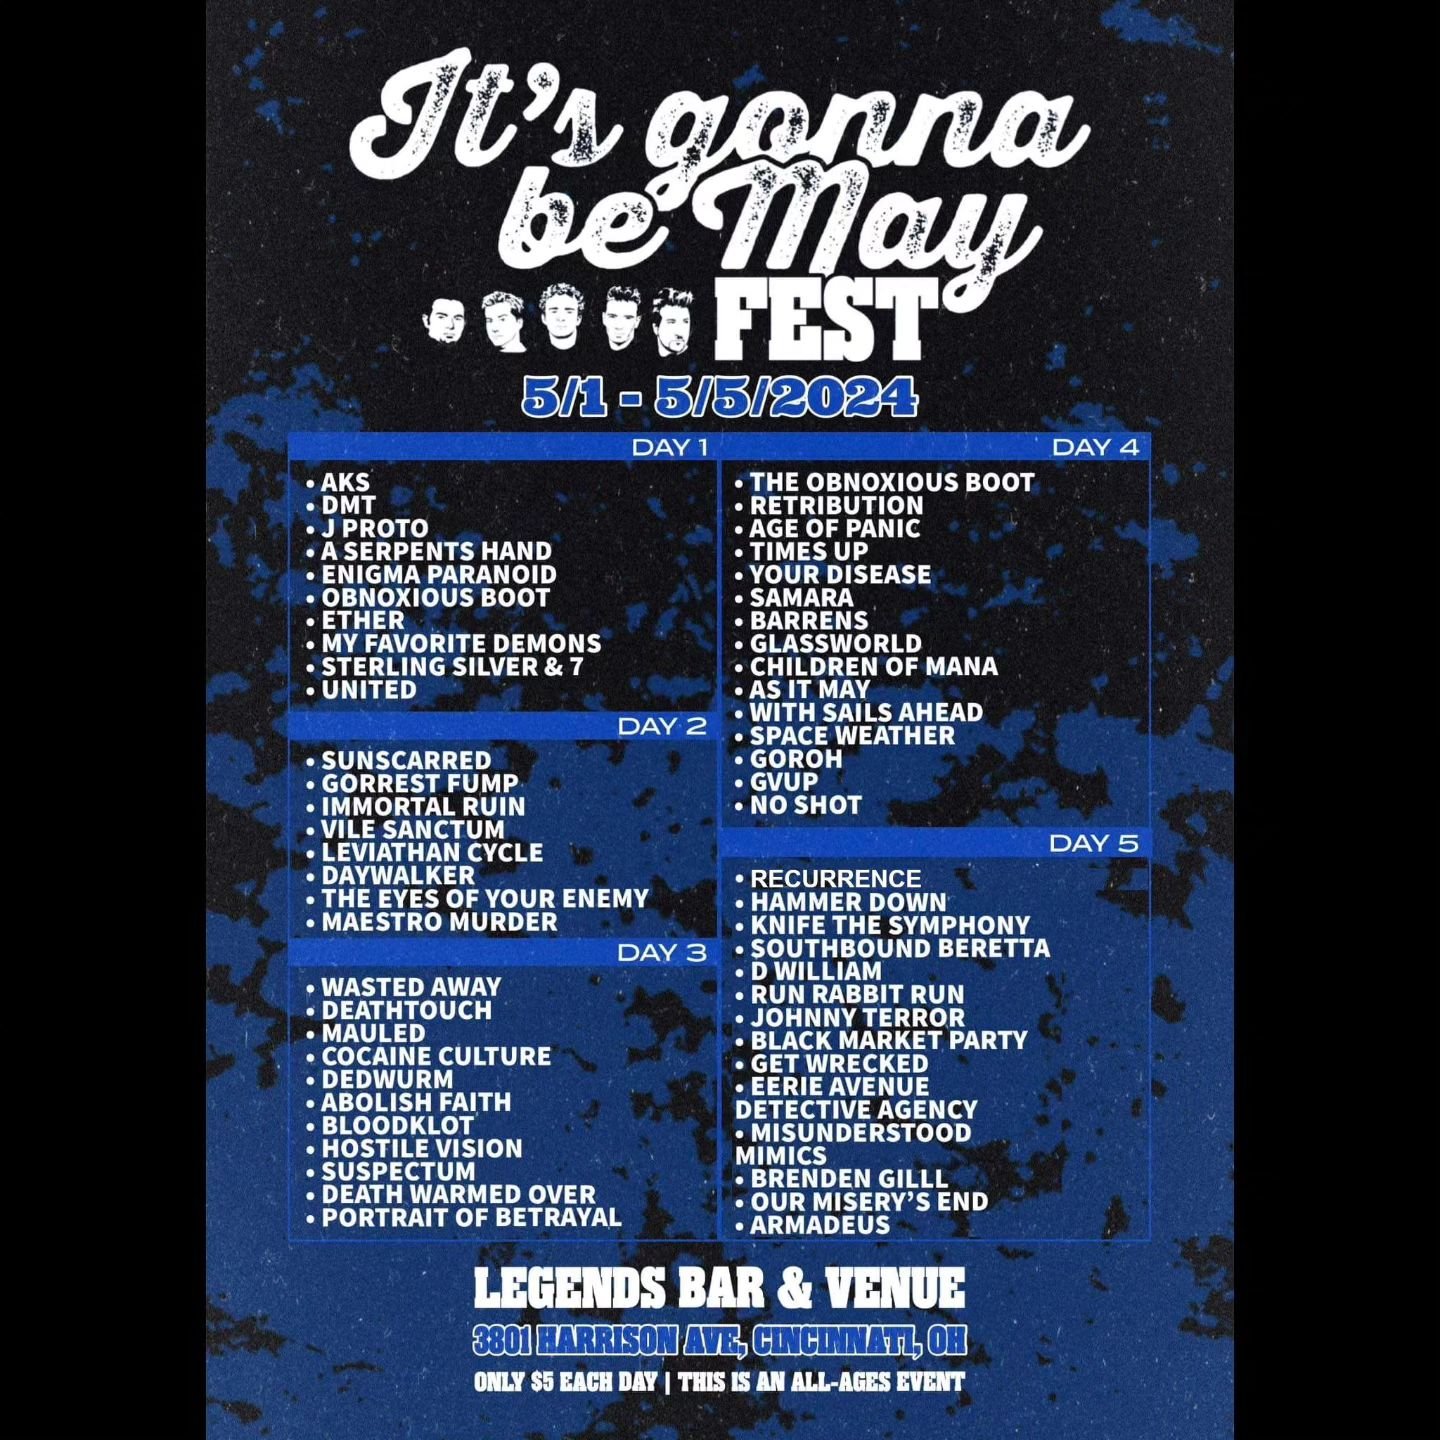 ❗Just announced❗ Recurrence is going to be headlining the final night of the &quot;It's Gonna Be May Fest&quot; Sunday May 5th at Legends Bar and Venue in Cincinnati! This is a 5 day festival with over 50 incredible bands. Tickets are 5$ at the door 